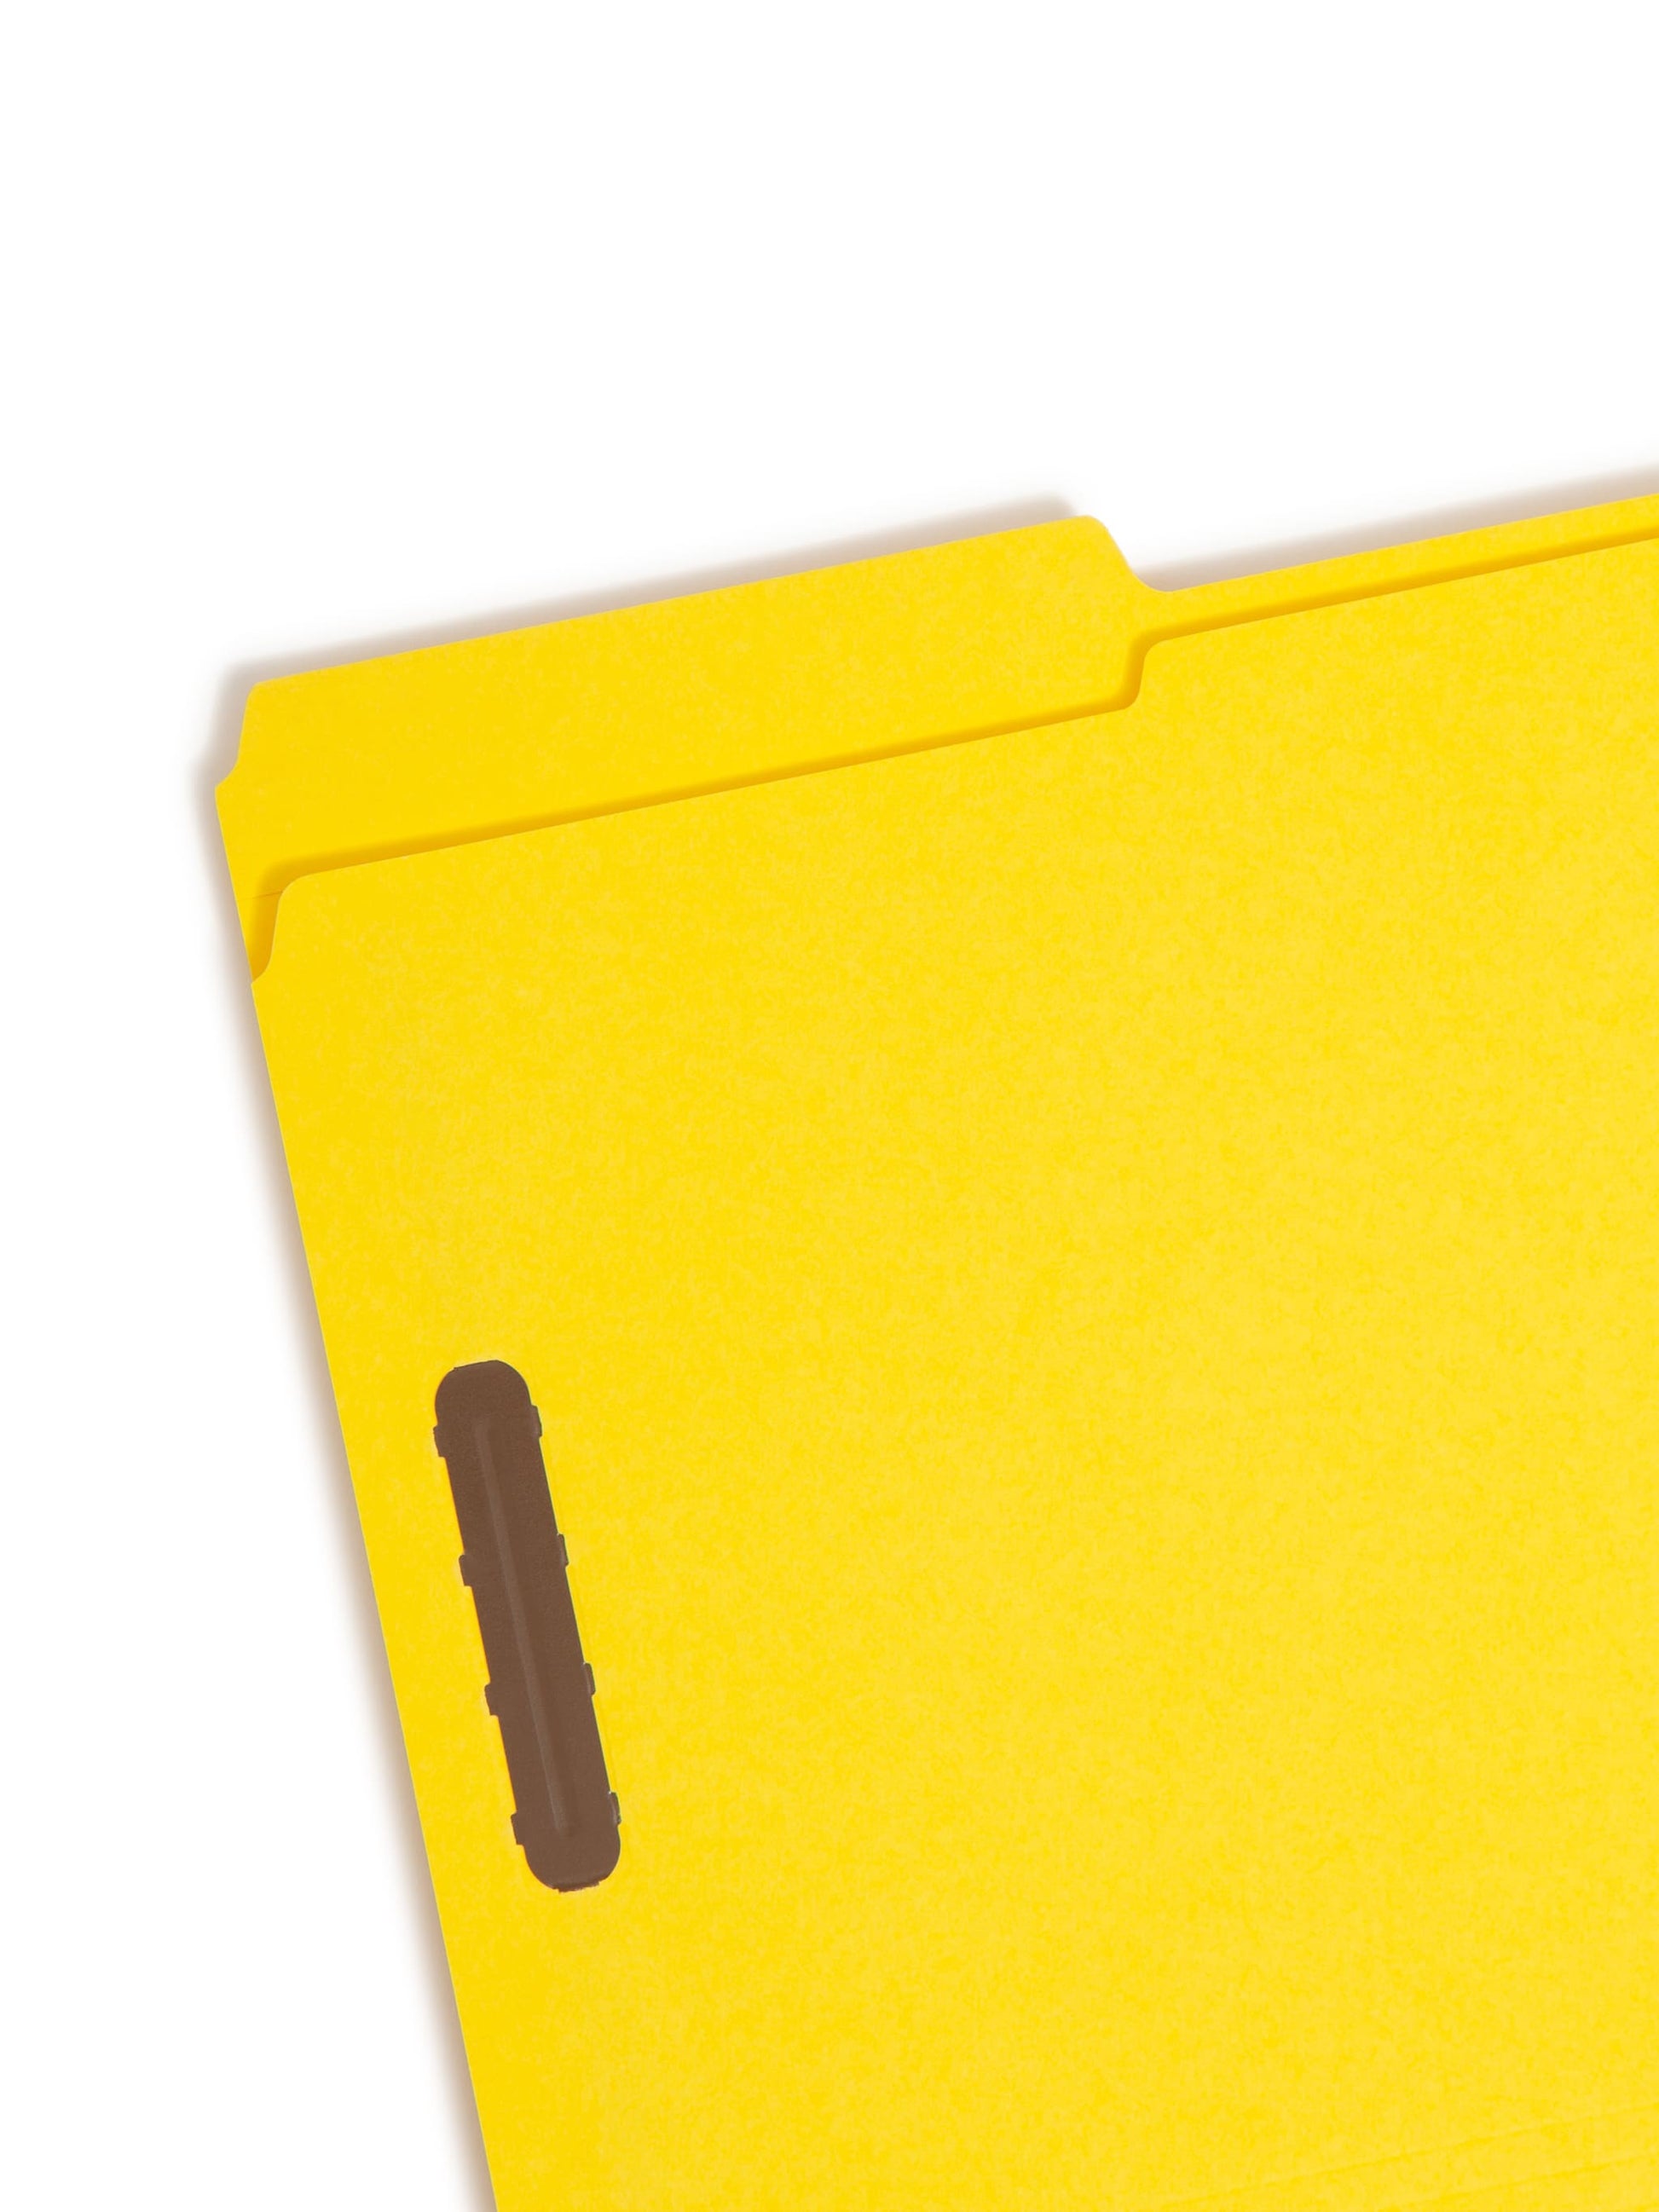 Reinforced Tab Fastener File Folders, 1/3-Cut Tab, 2 Fasteners, Yellow Color, Legal Size, Set of 50, 086486179409